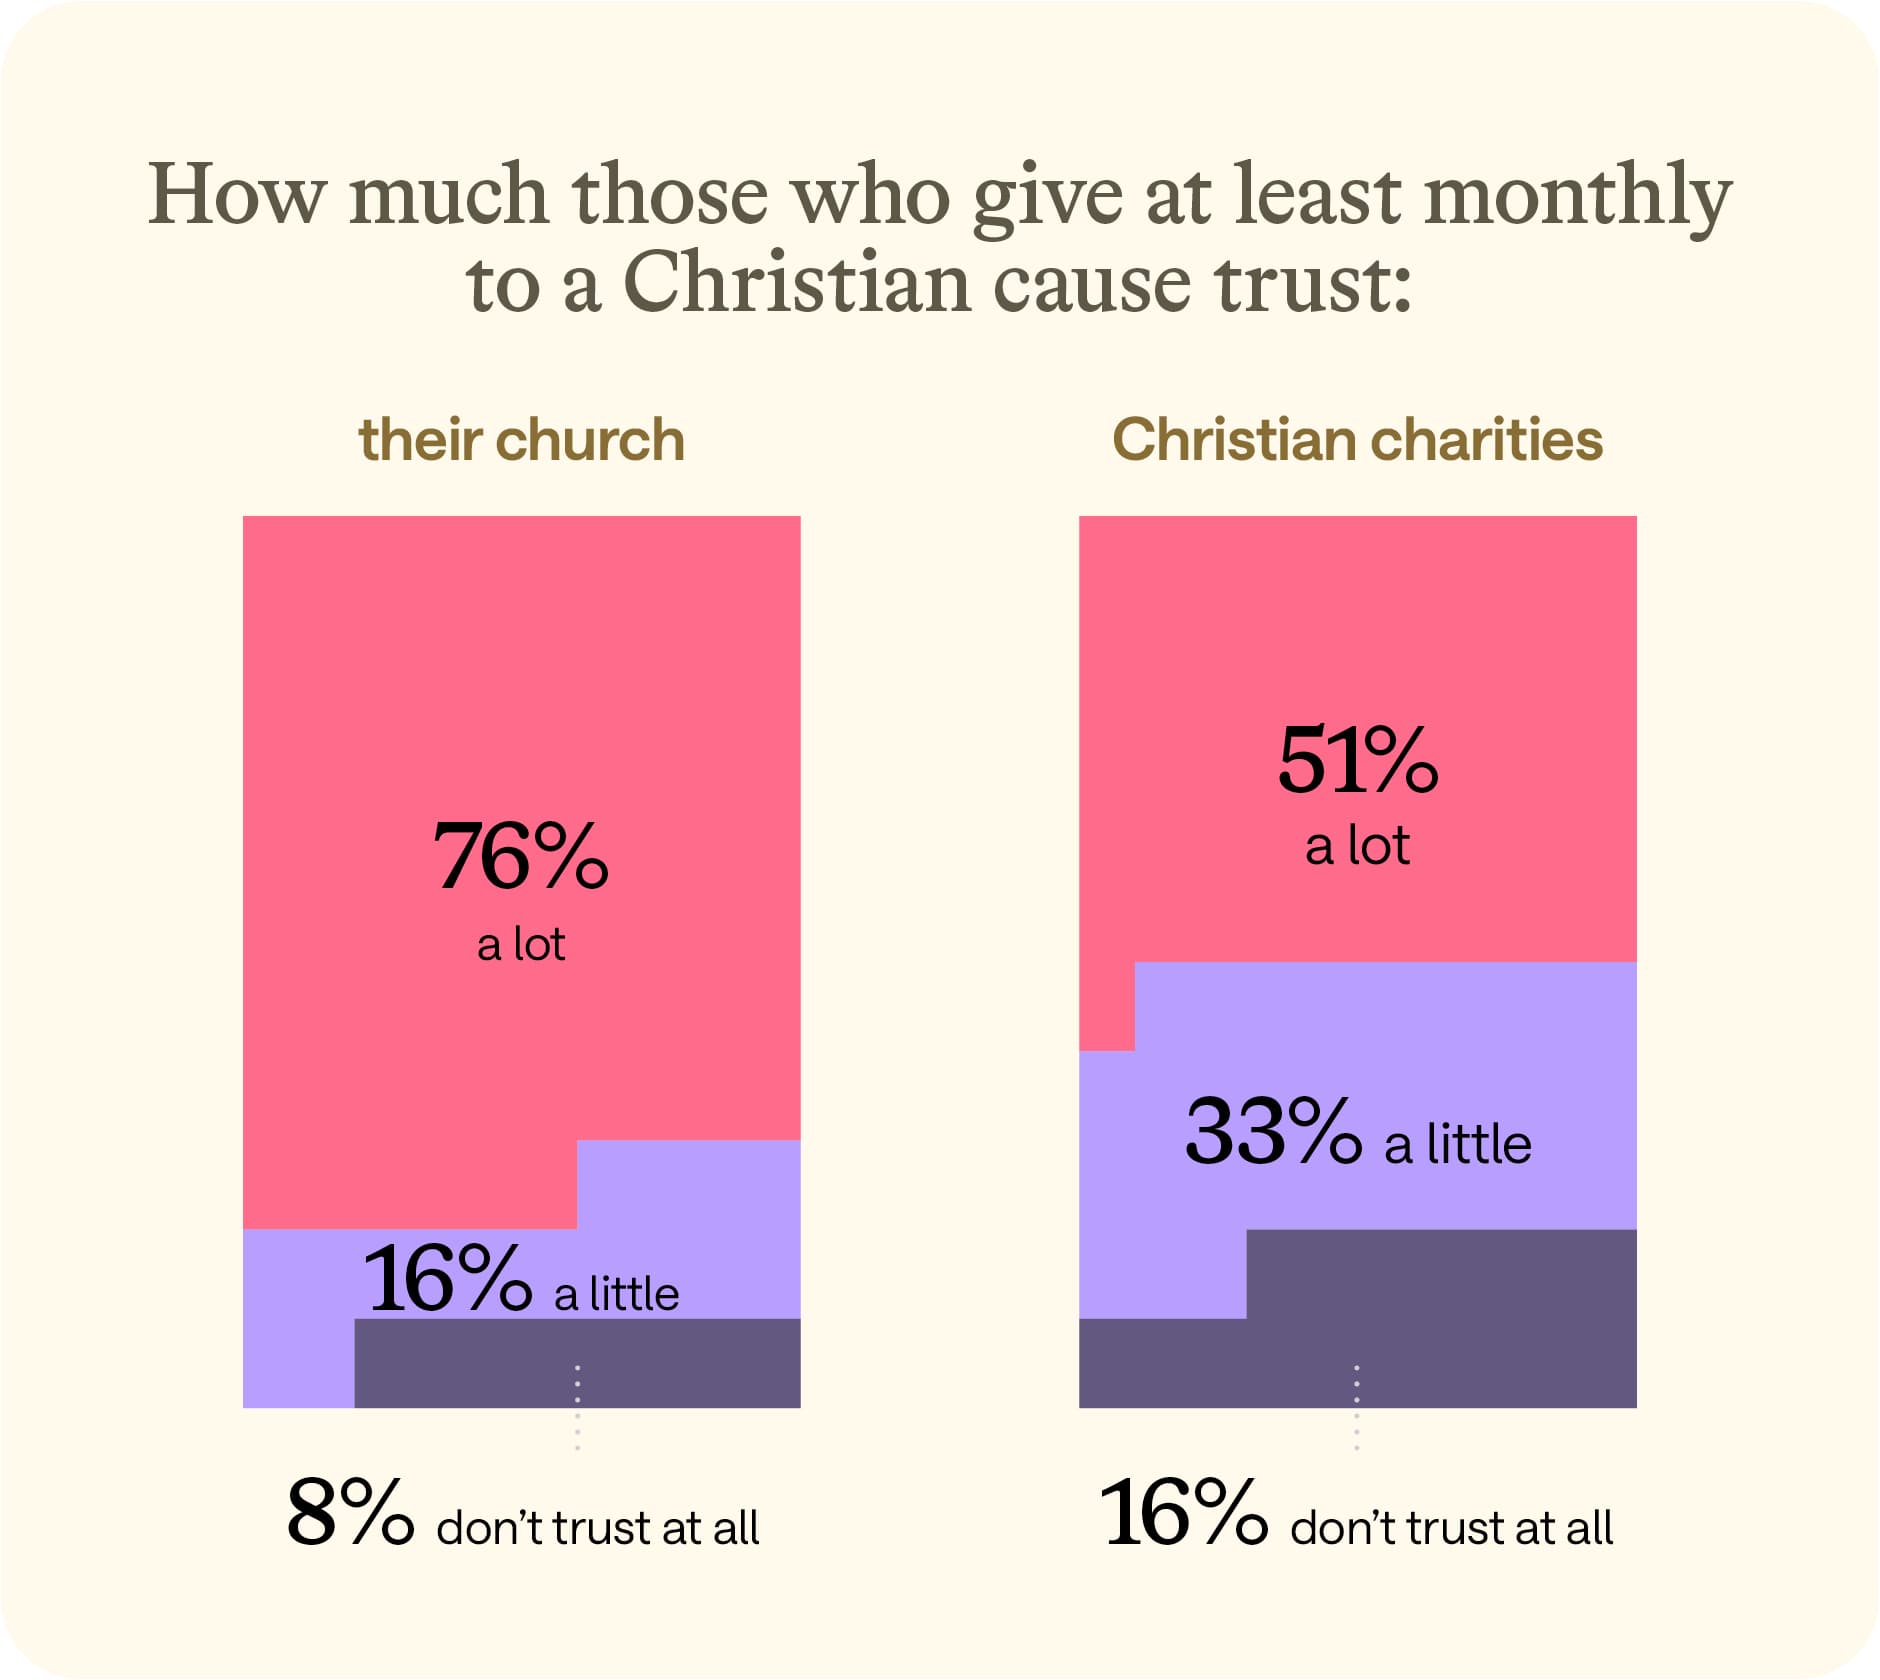 Graph to show how much those who give at least monthly to a Christian cause trust their church and Christian charities